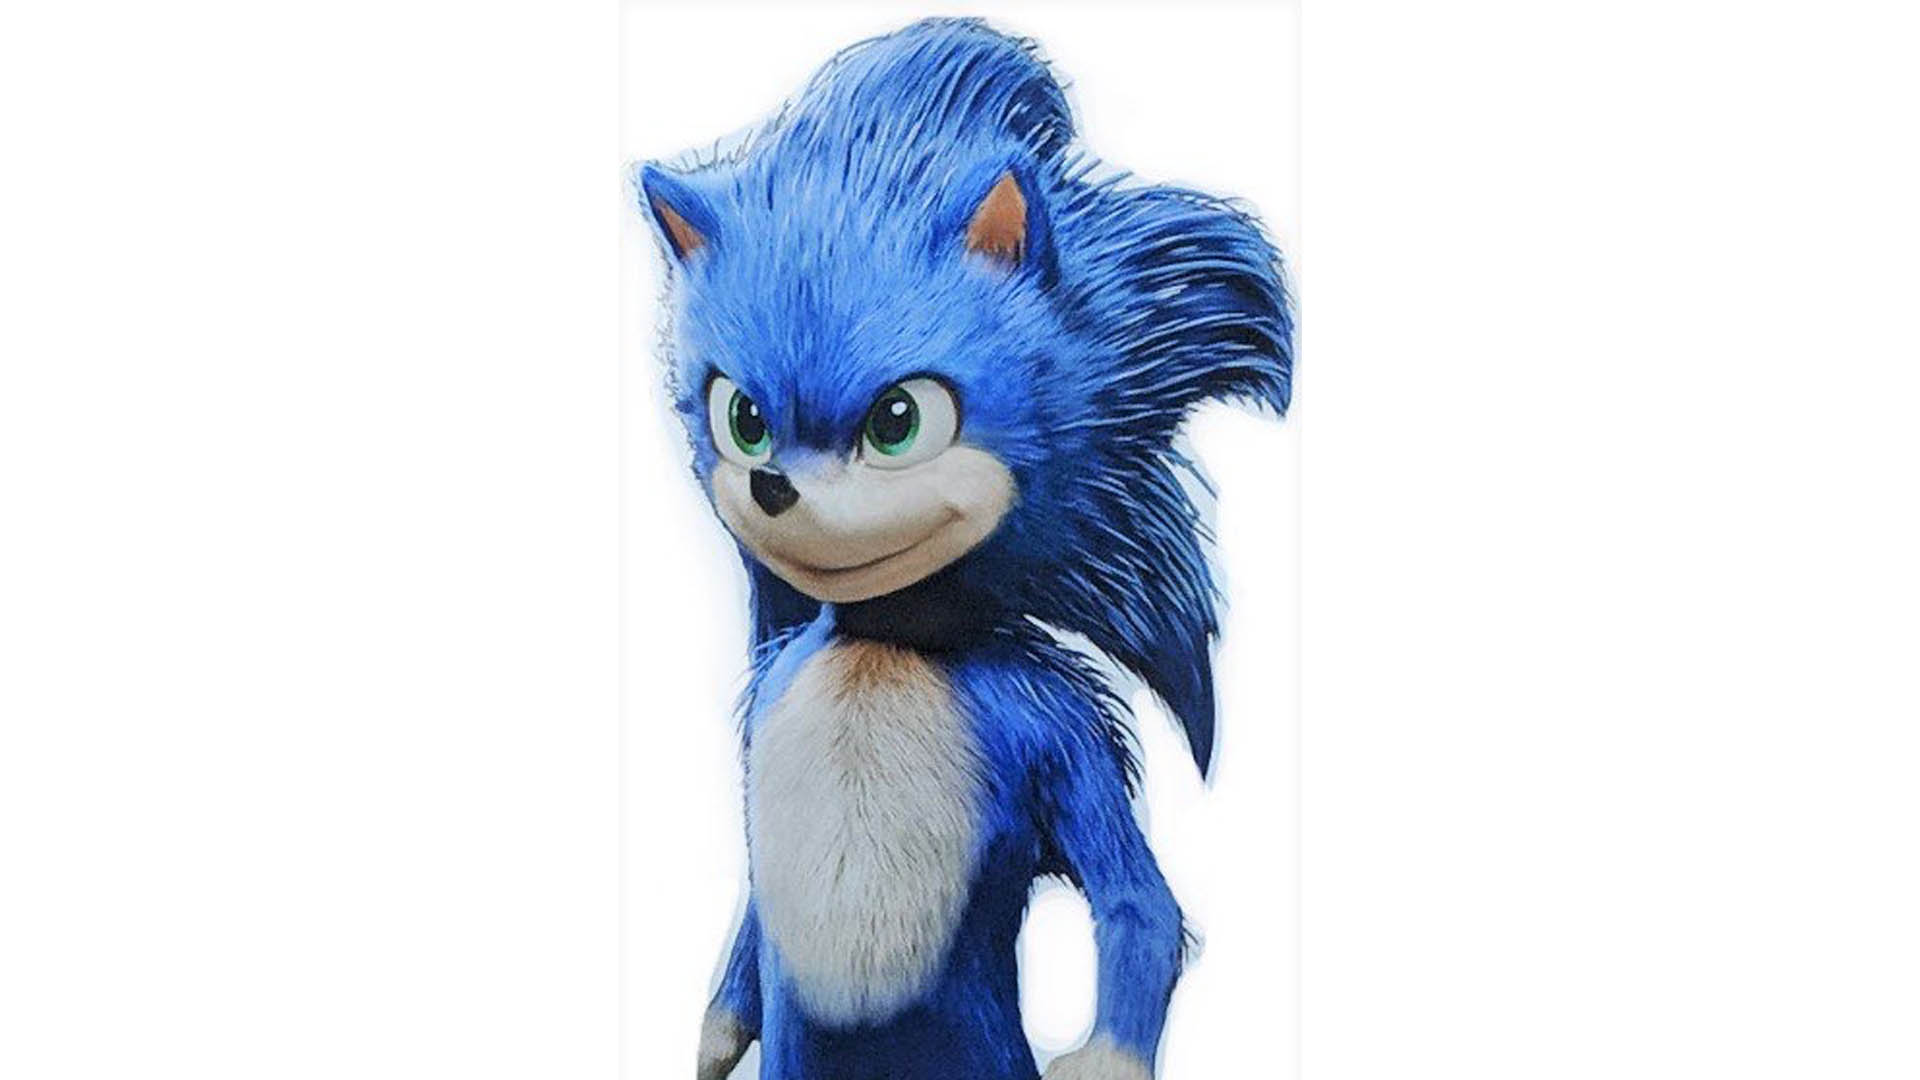 Full body render of Sonic character from film revealed | Nintendo Wire